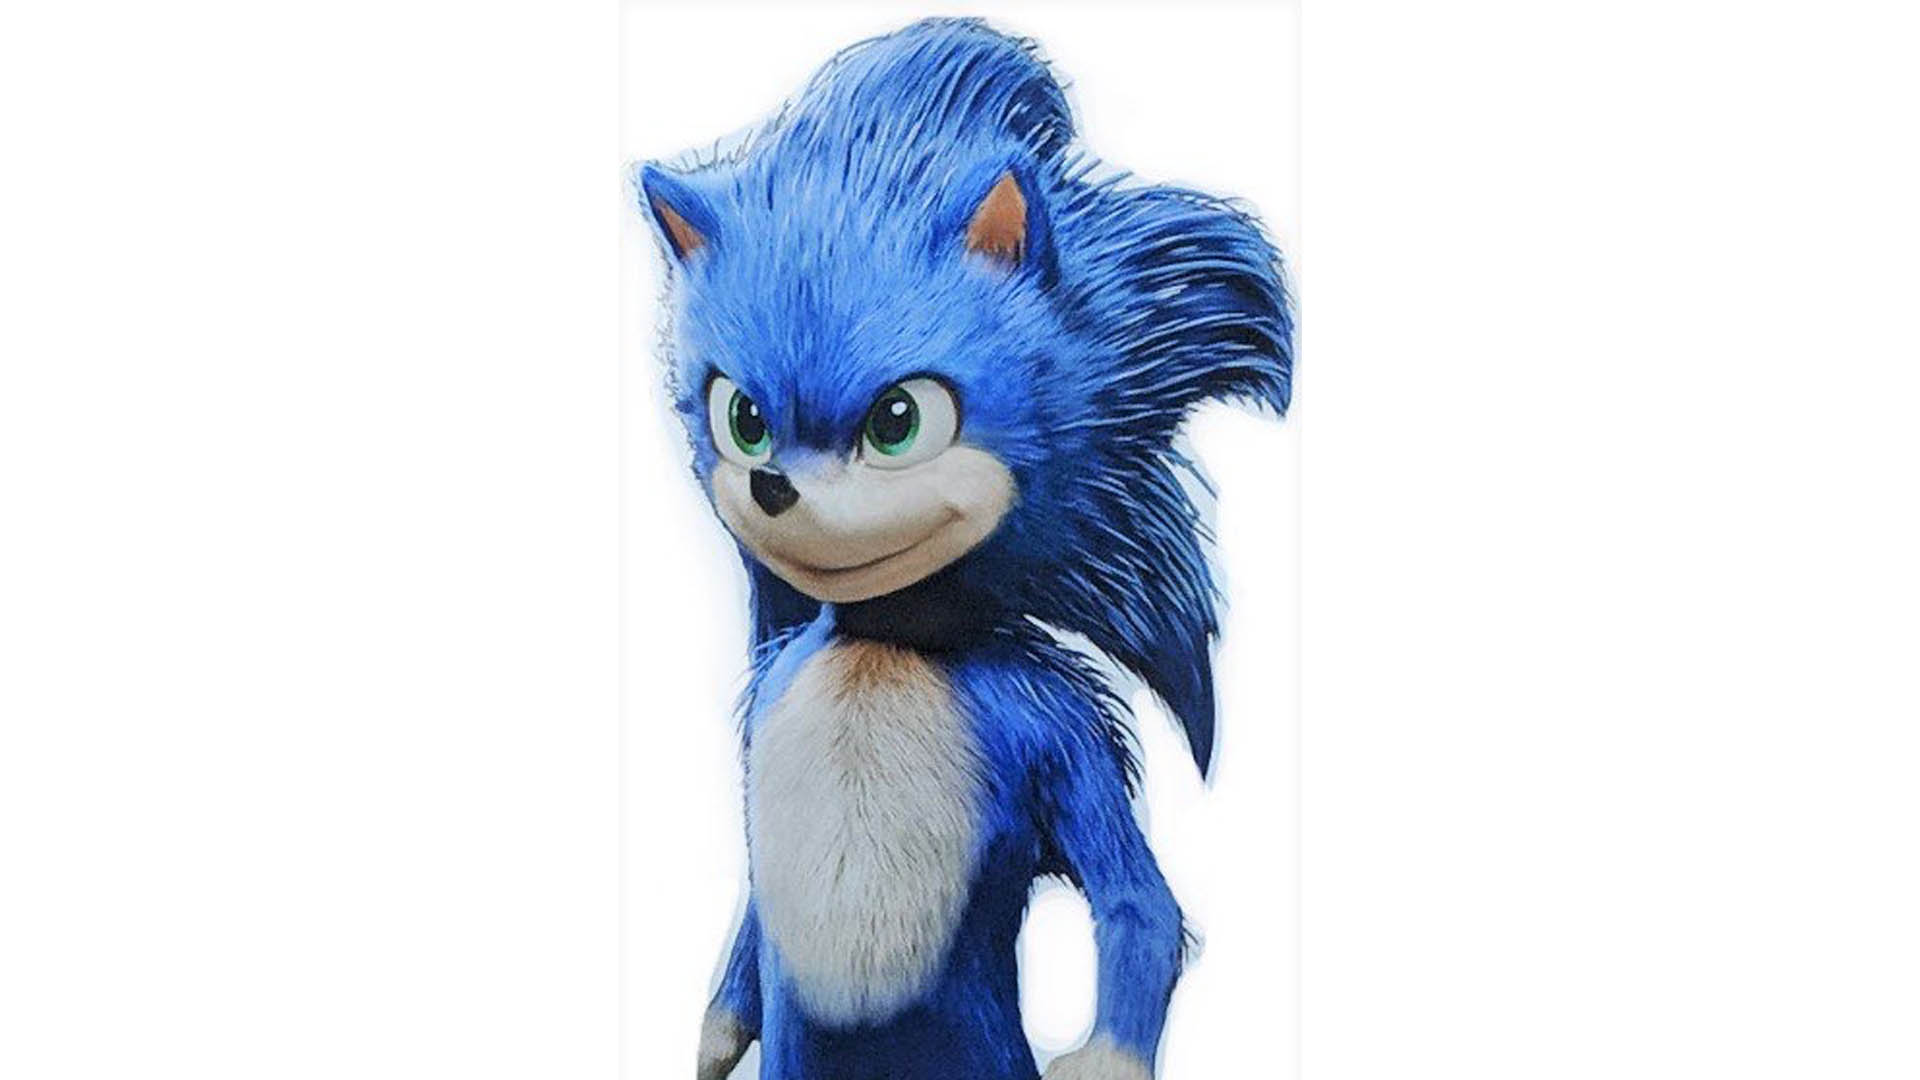 Full body render of Sonic character from film revealed | Nintendo Wire